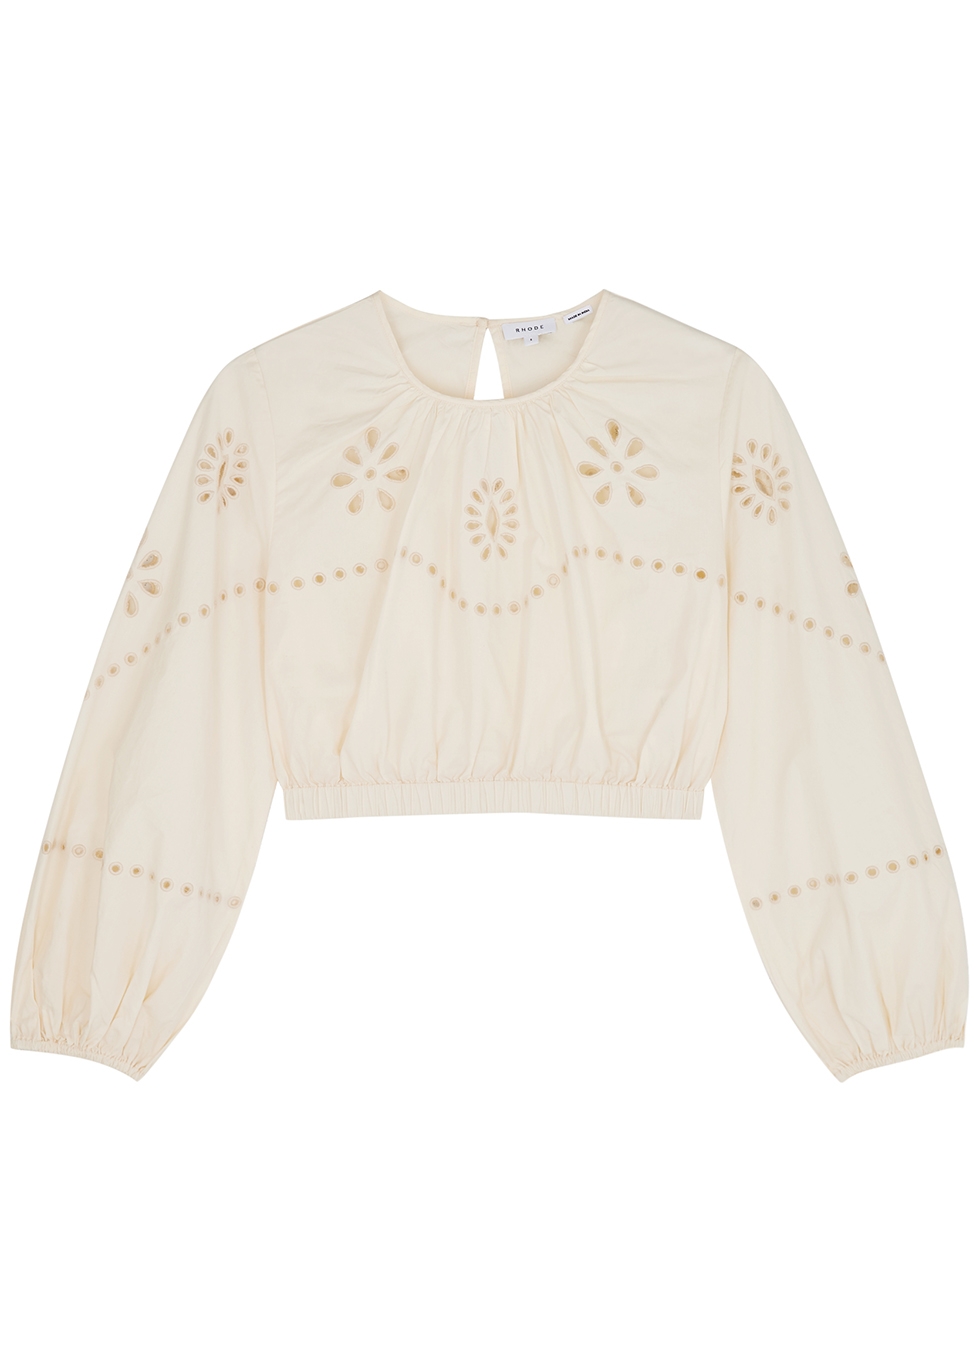 Adeline cream cropped broderie anglaise top